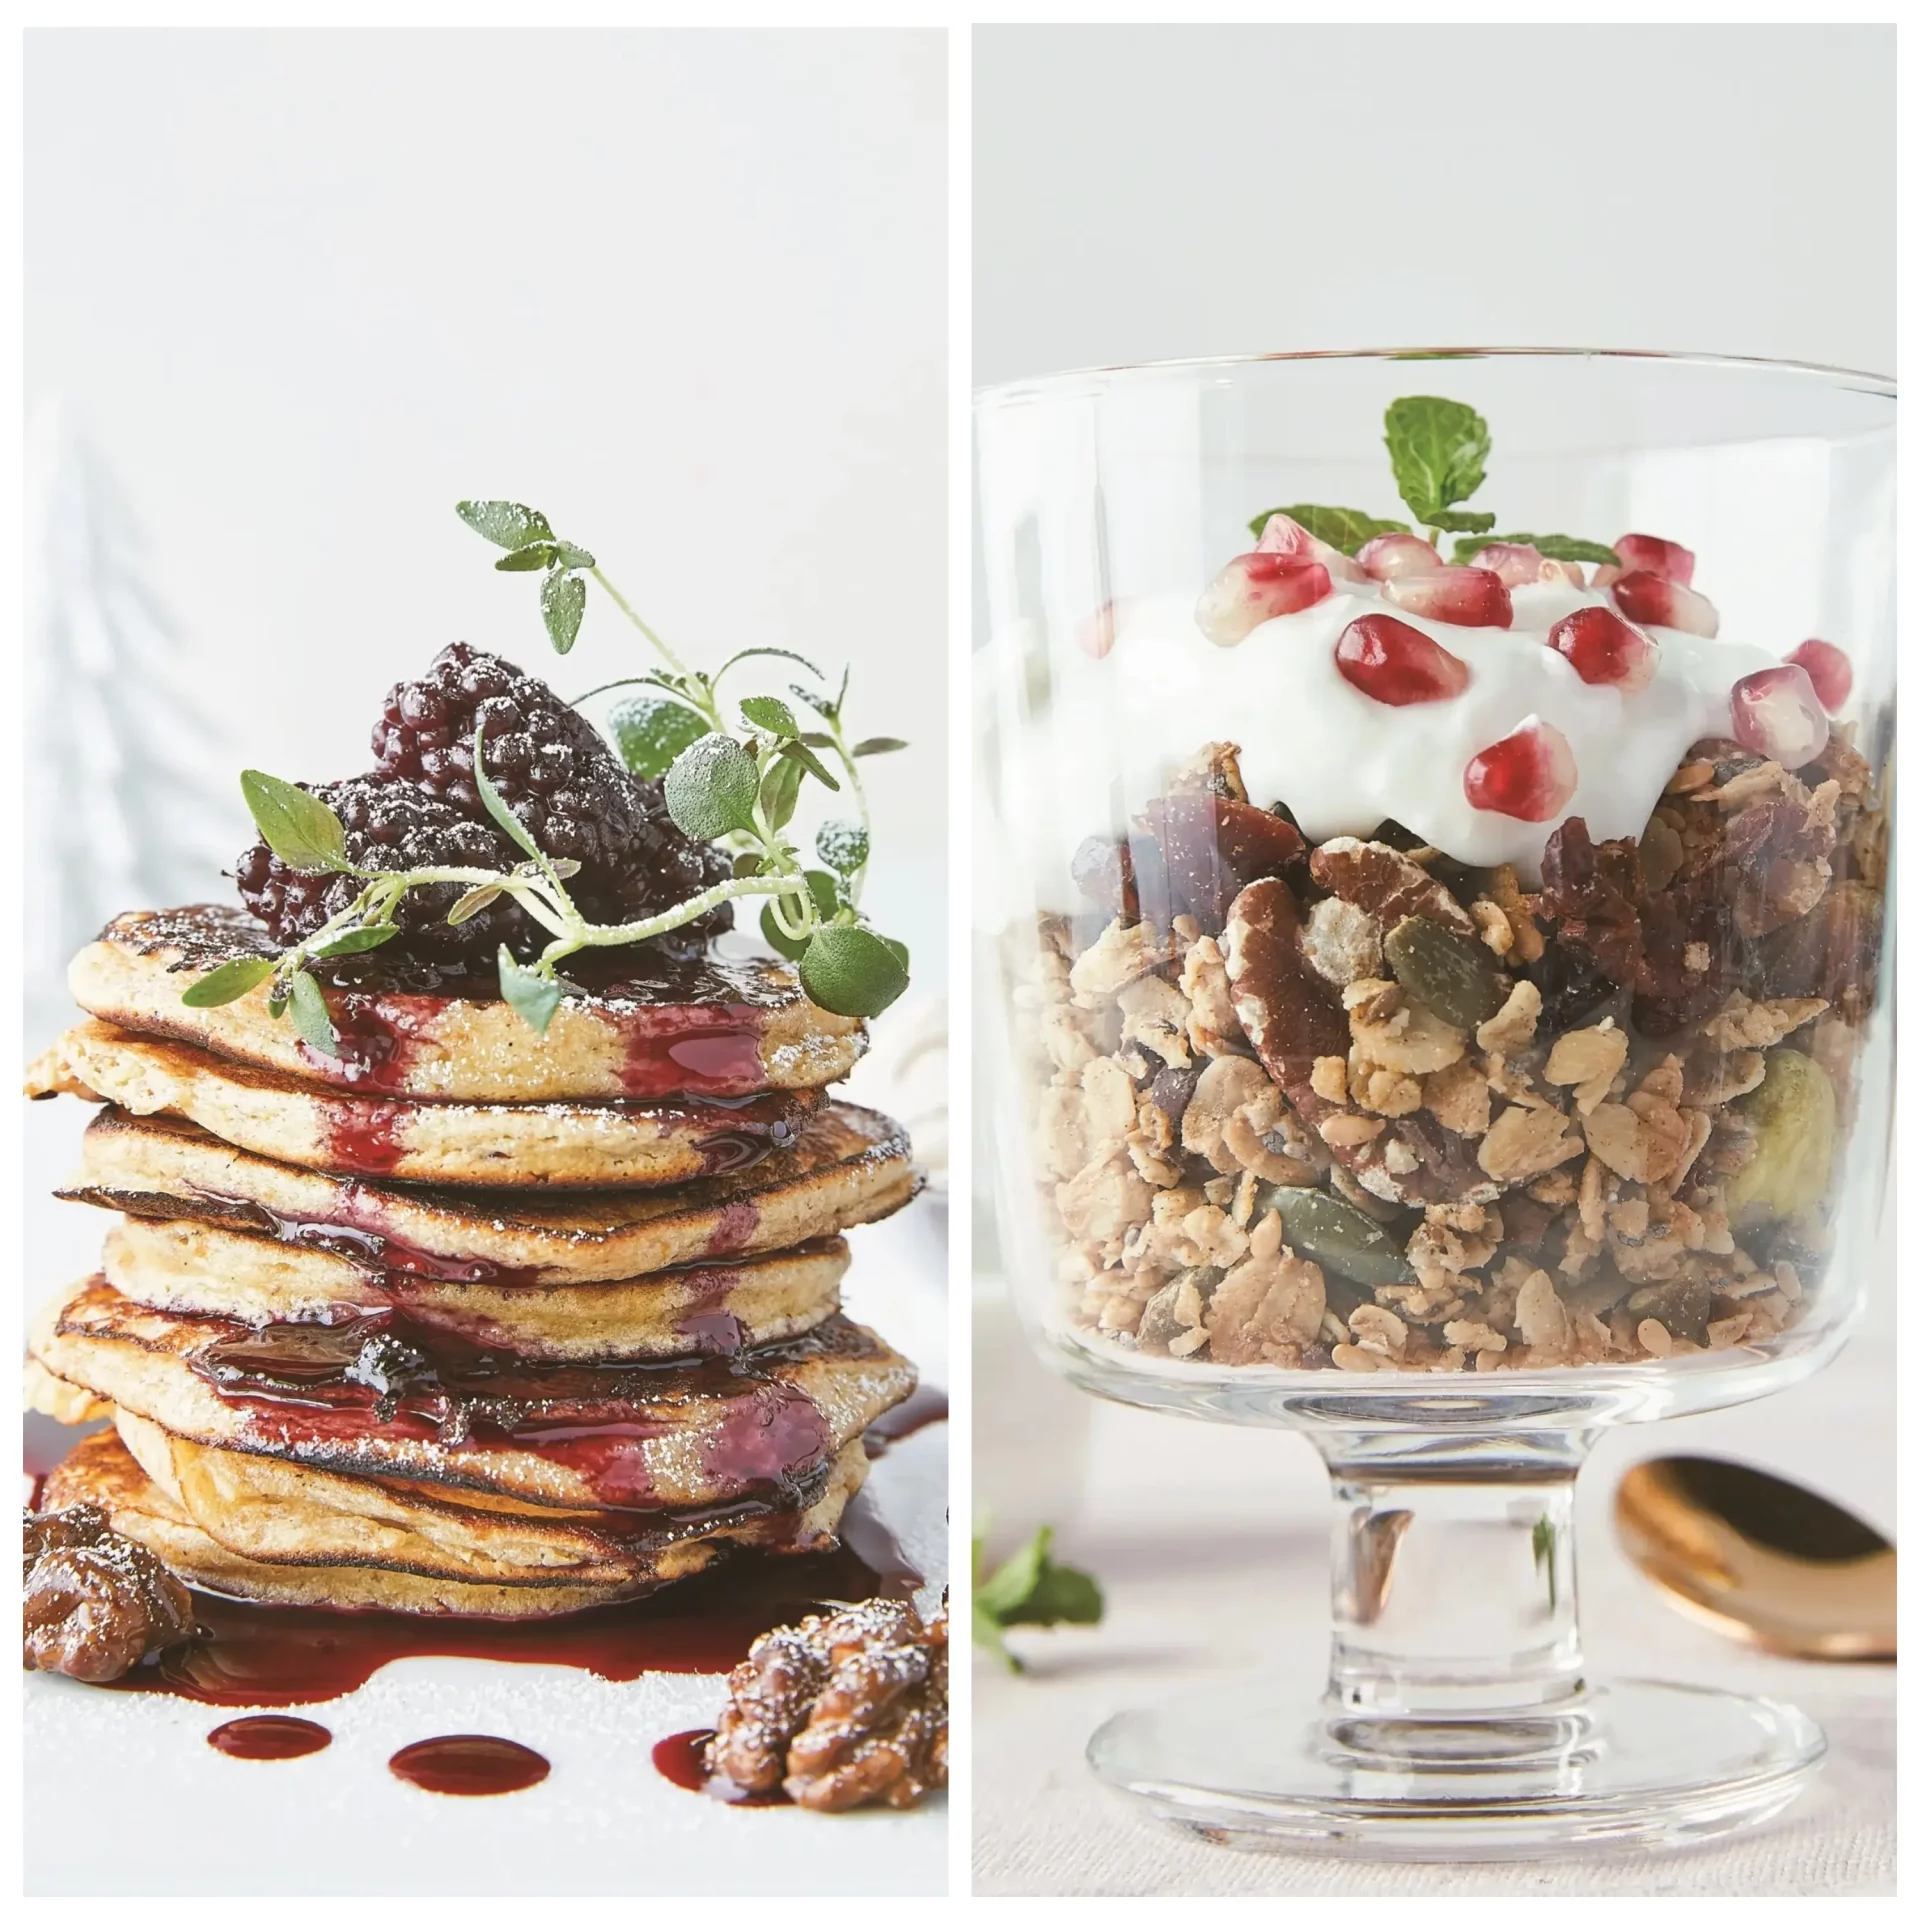 Ricotta Pancakes with Warm Blackberries and Caramelized Walnuts